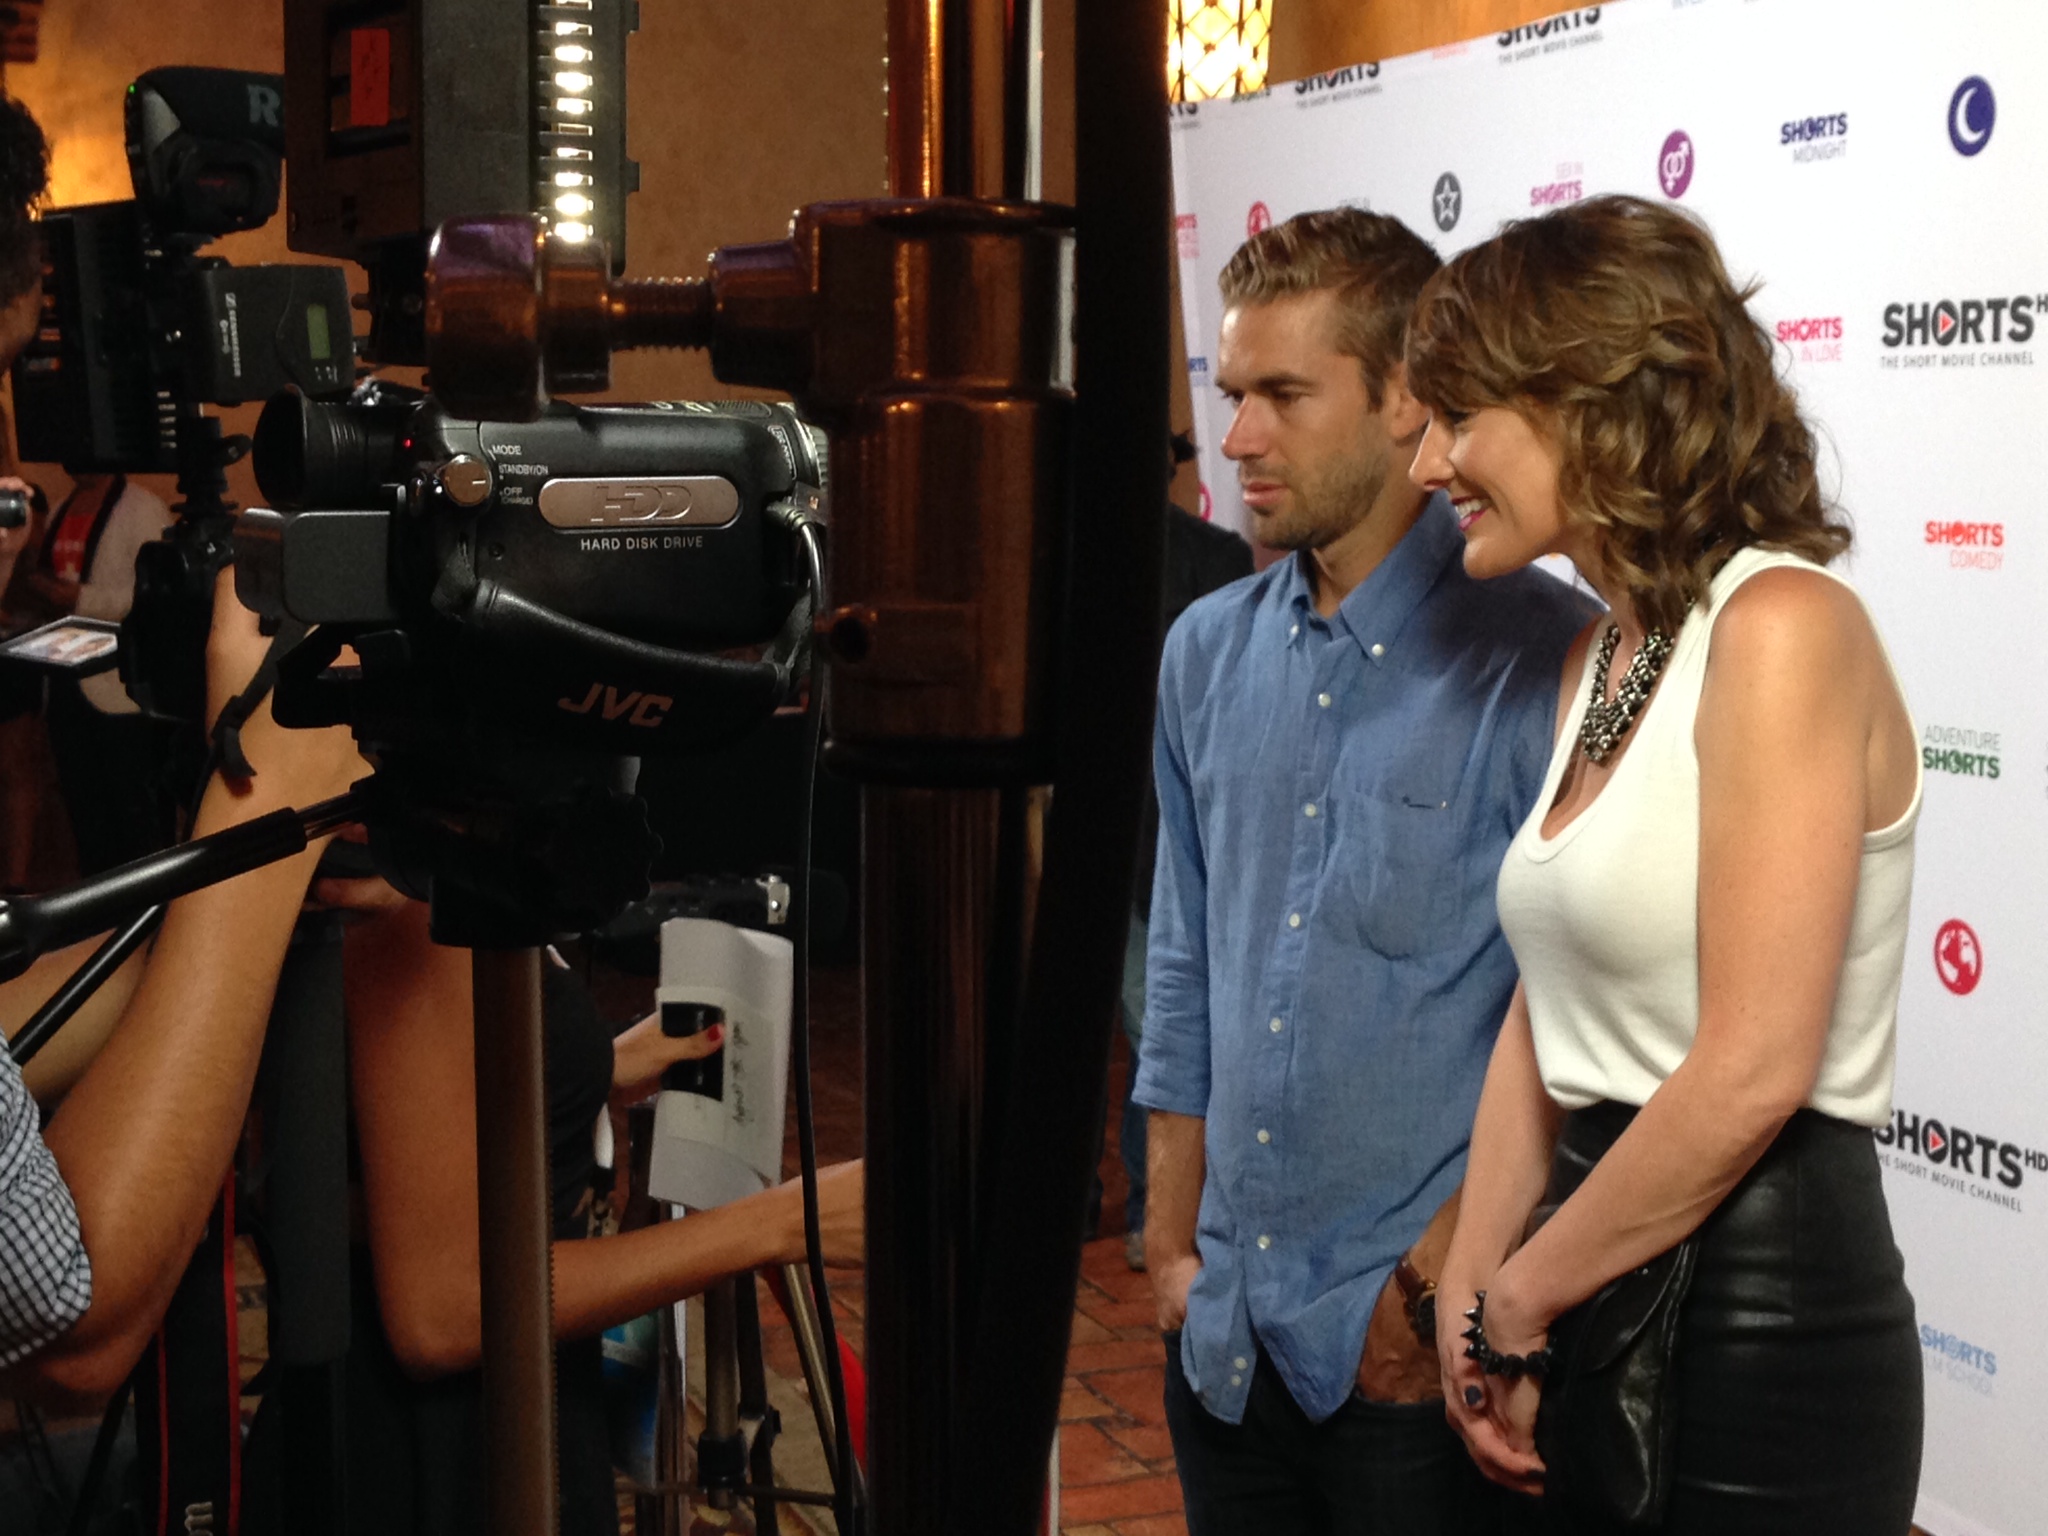 Writer Sunah Bilsted and Director Brett Sorem being interviewed about #twitterkills at HollyShorts Film Festival 2014